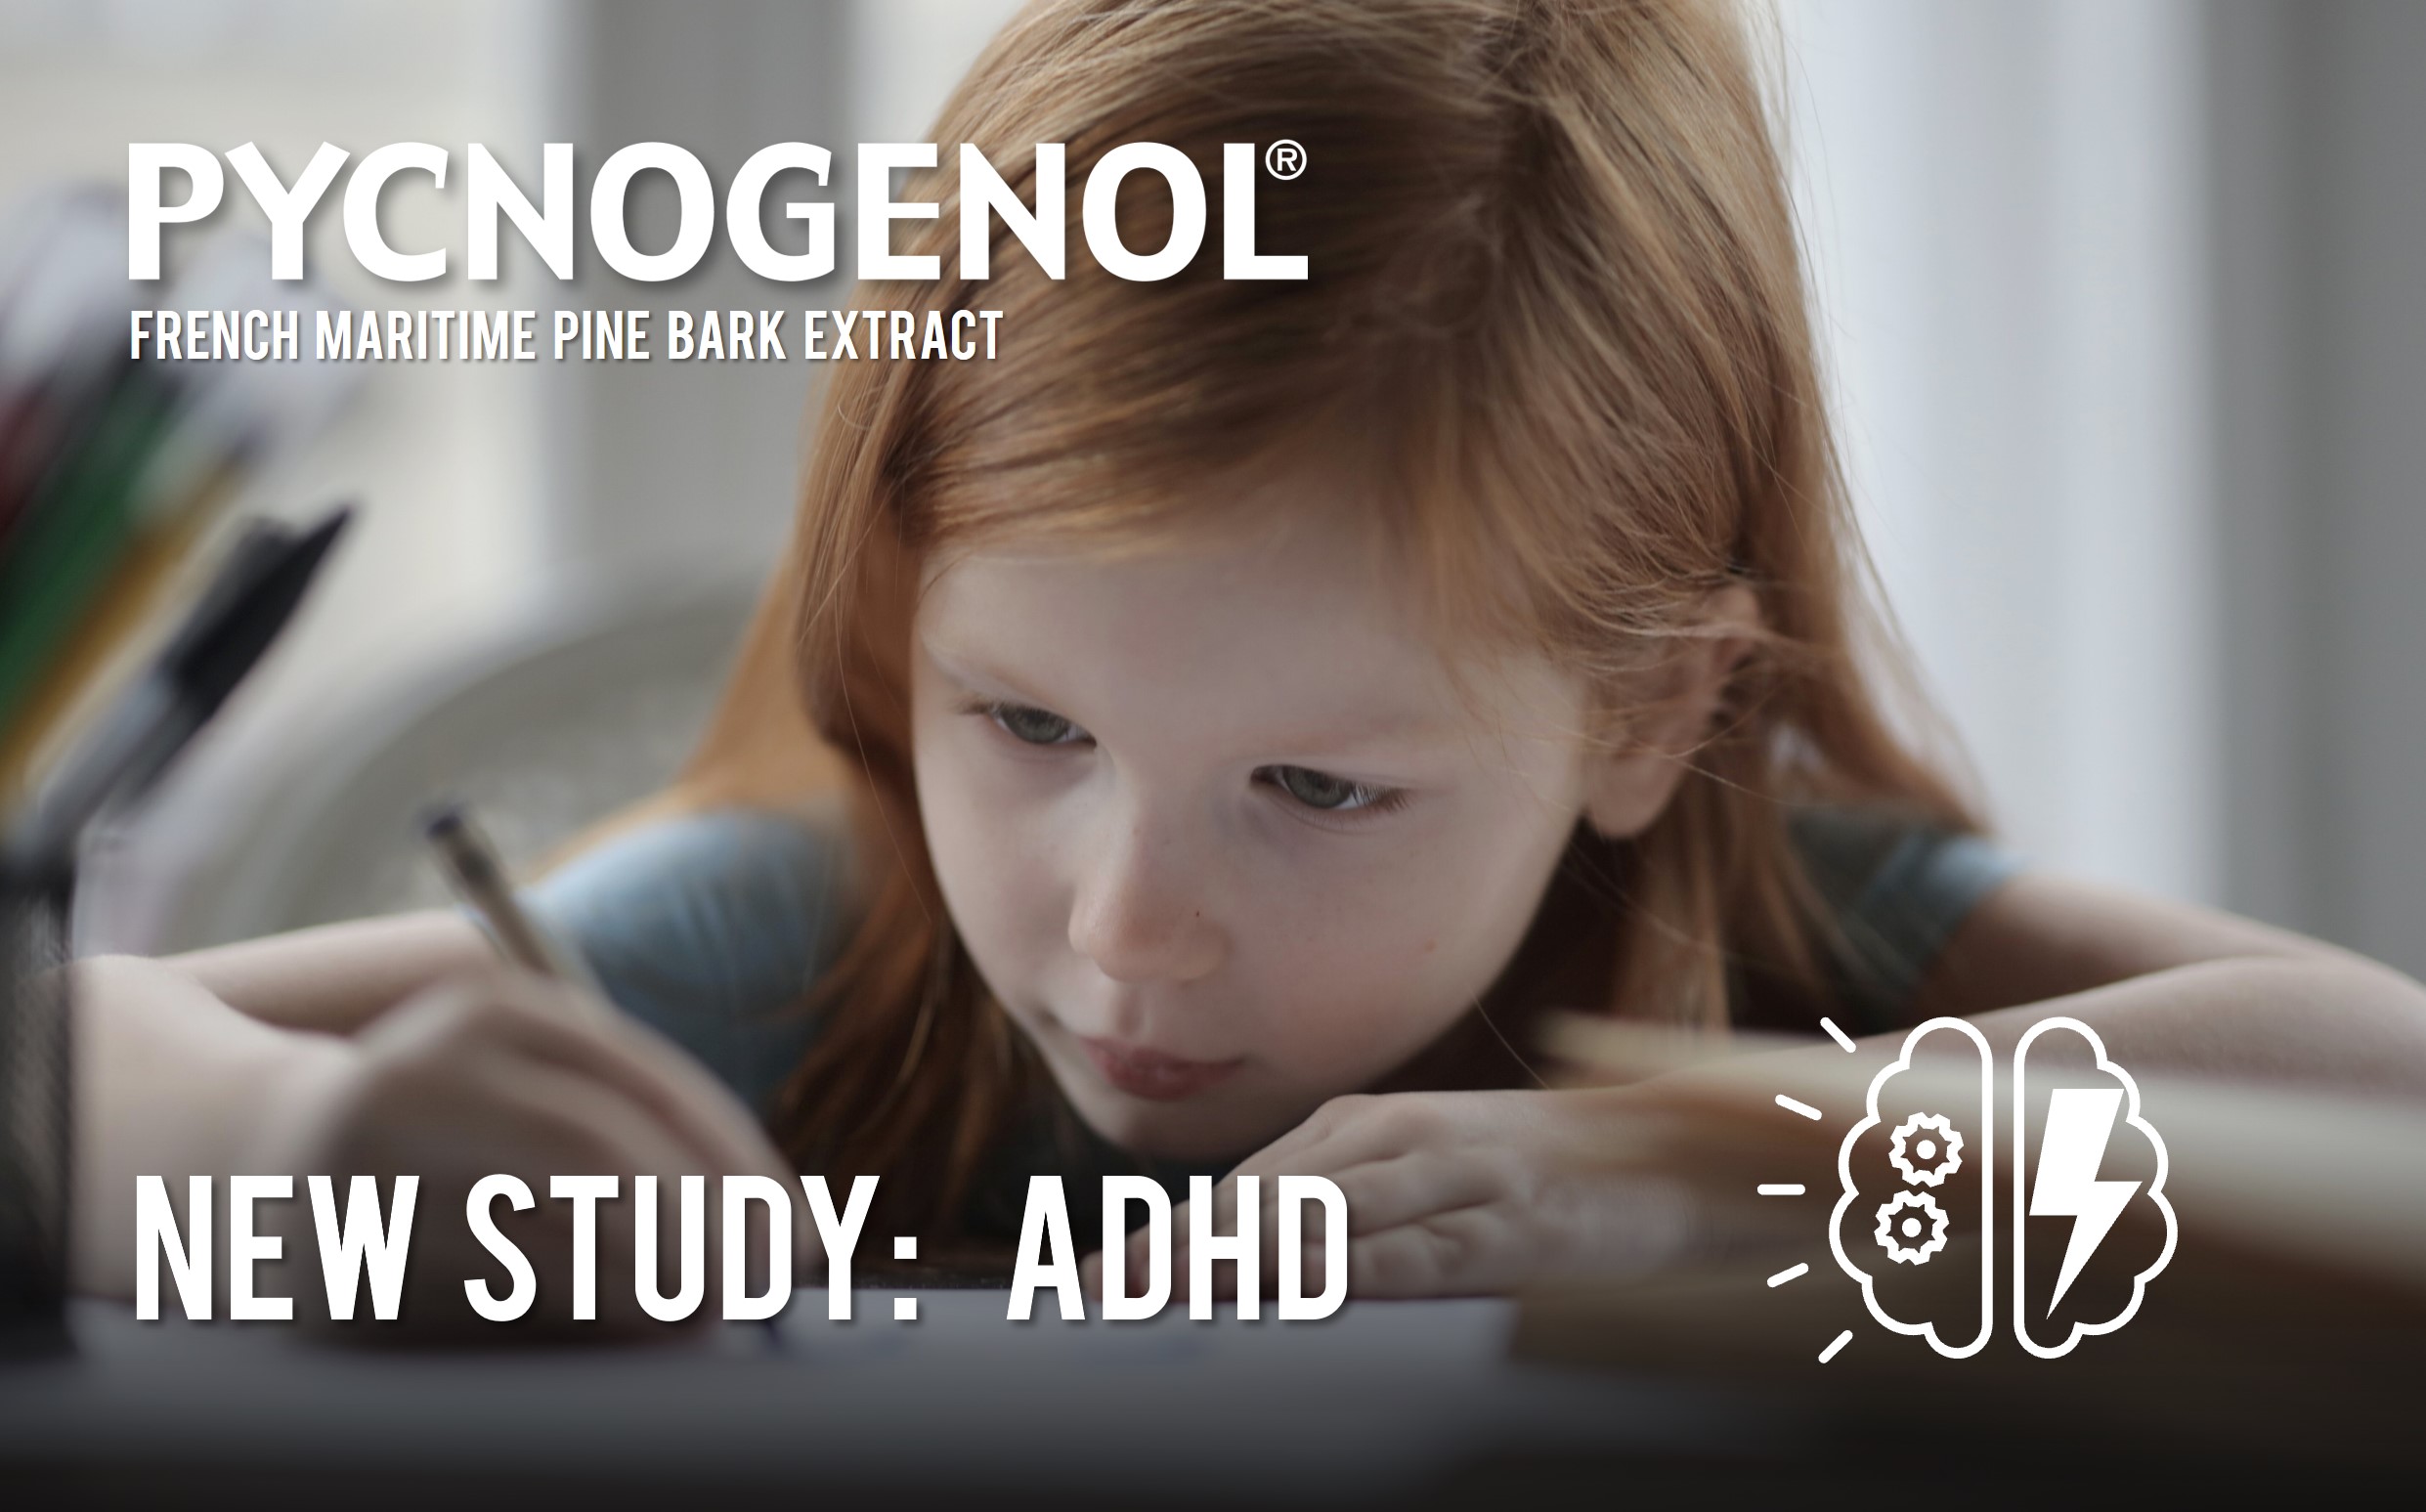 Pycnogenol® Effective for Managing Pediatric ADHD Without Side Effects Commonly Associated with Pharmaceuticals